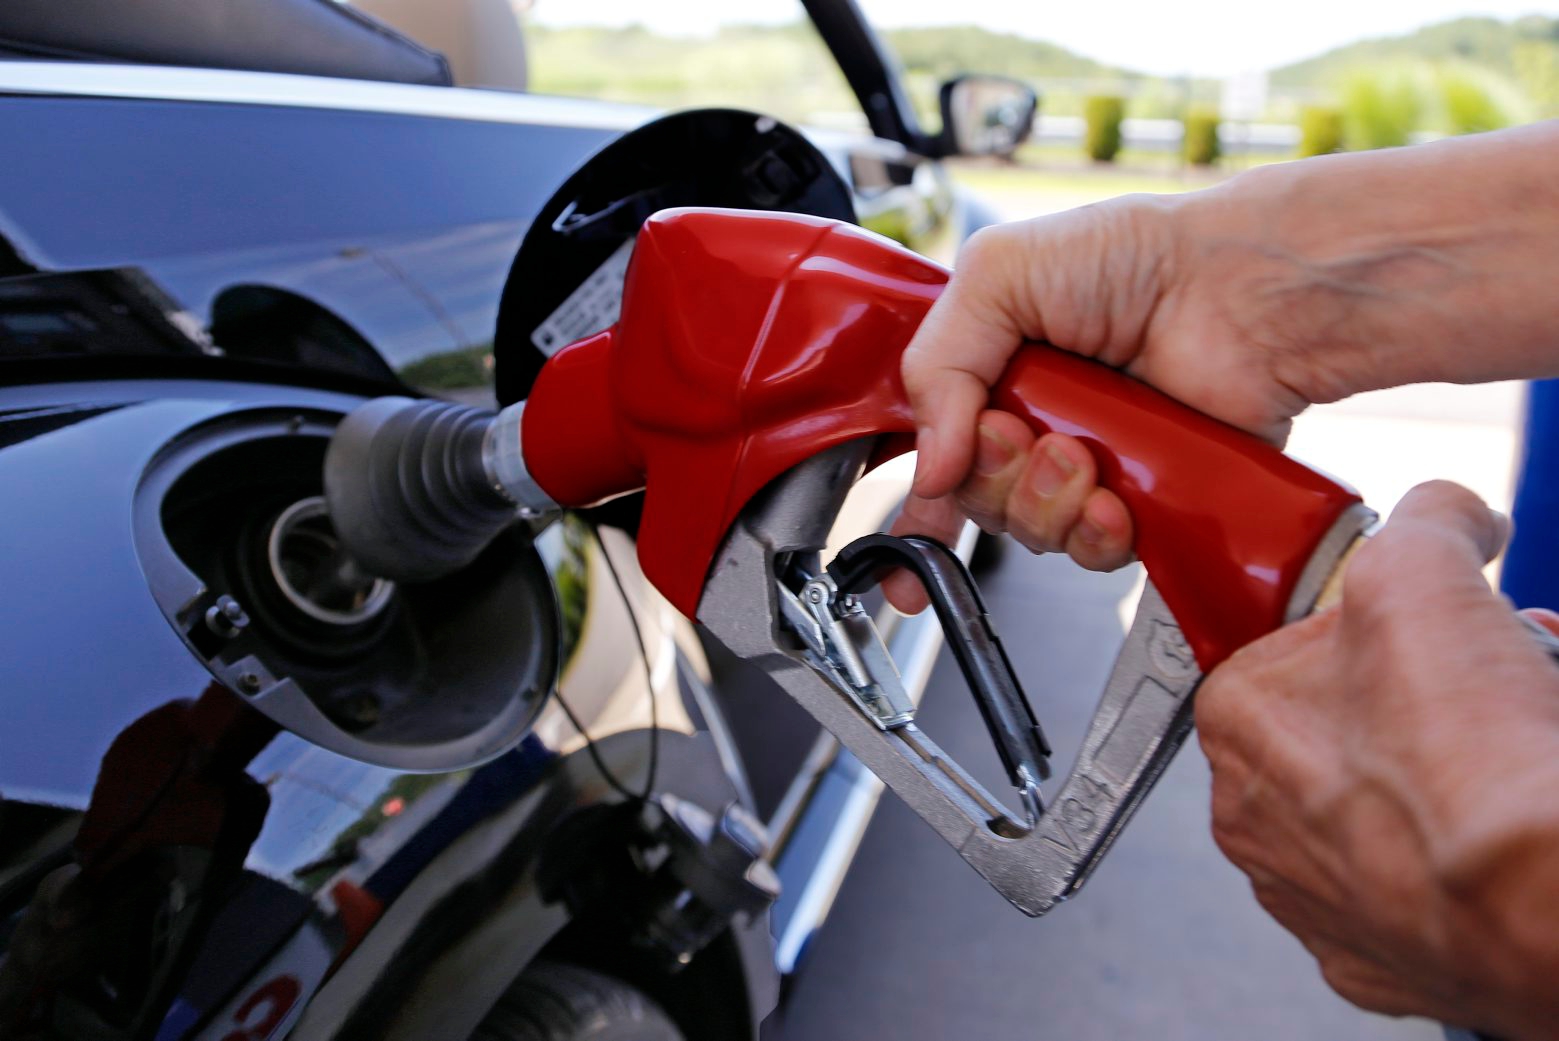 FILE - In this Thursday, July 16, 2015, file photo, a customer re-fuels her car at a Costco in Robinson Township, Pa. The plunging price of oil in 2016 is dragging stock markets to their worst start to a year ever, even though low fuel prices are great for consumers and most companies. (AP Photo/Gene J. Puskar, File) Oil Prices-Stock Market Slump-Q A